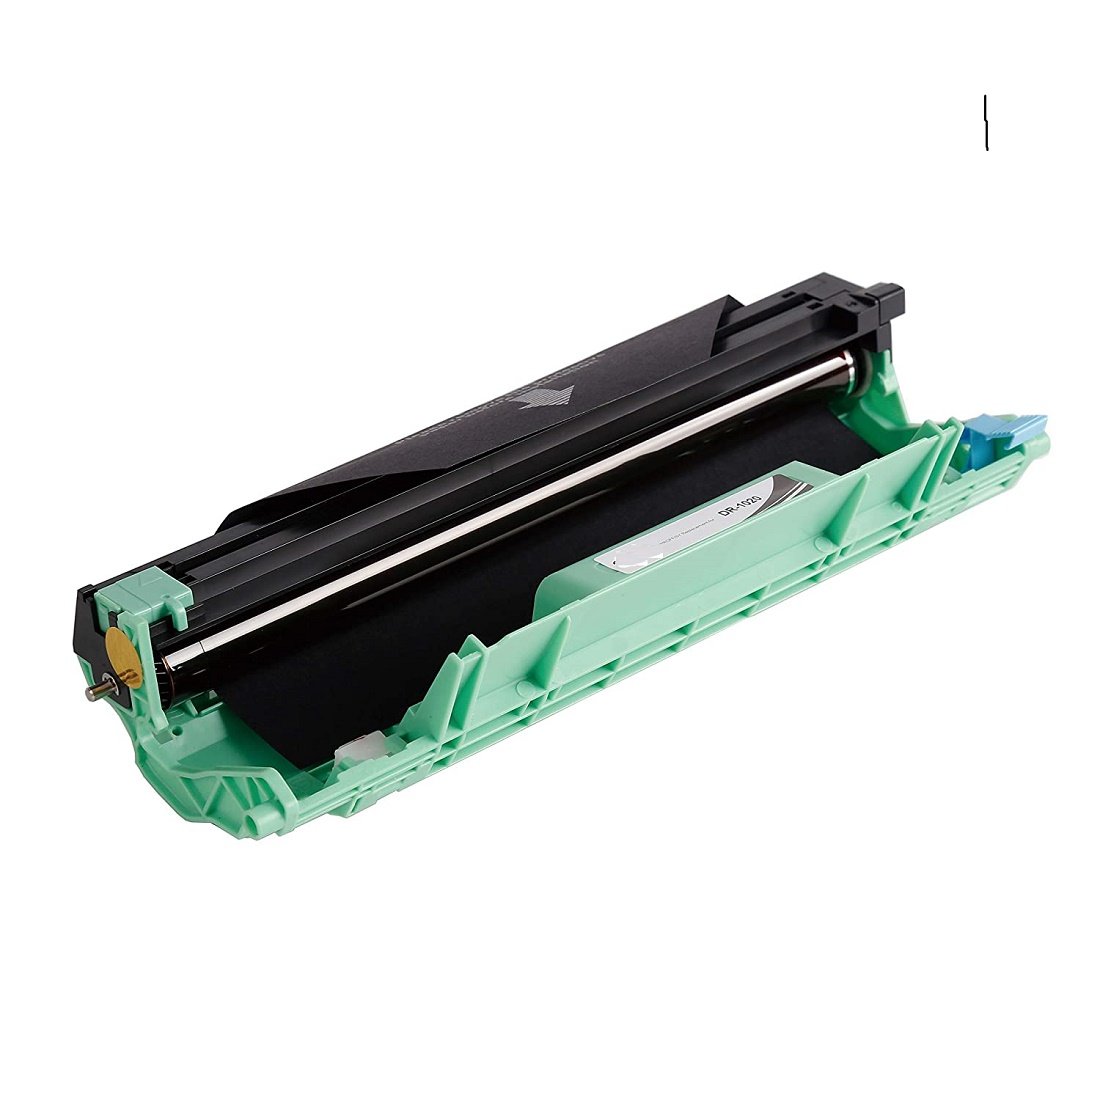 BUNDLE] TN-1000 Compatible Brother Toner Cartridge for HL-1110 1210W DCP-1510  1610W MFC-1810 1910W [theinksupply], Computers & Tech, Printers, Scanners &  Copiers on Carousell